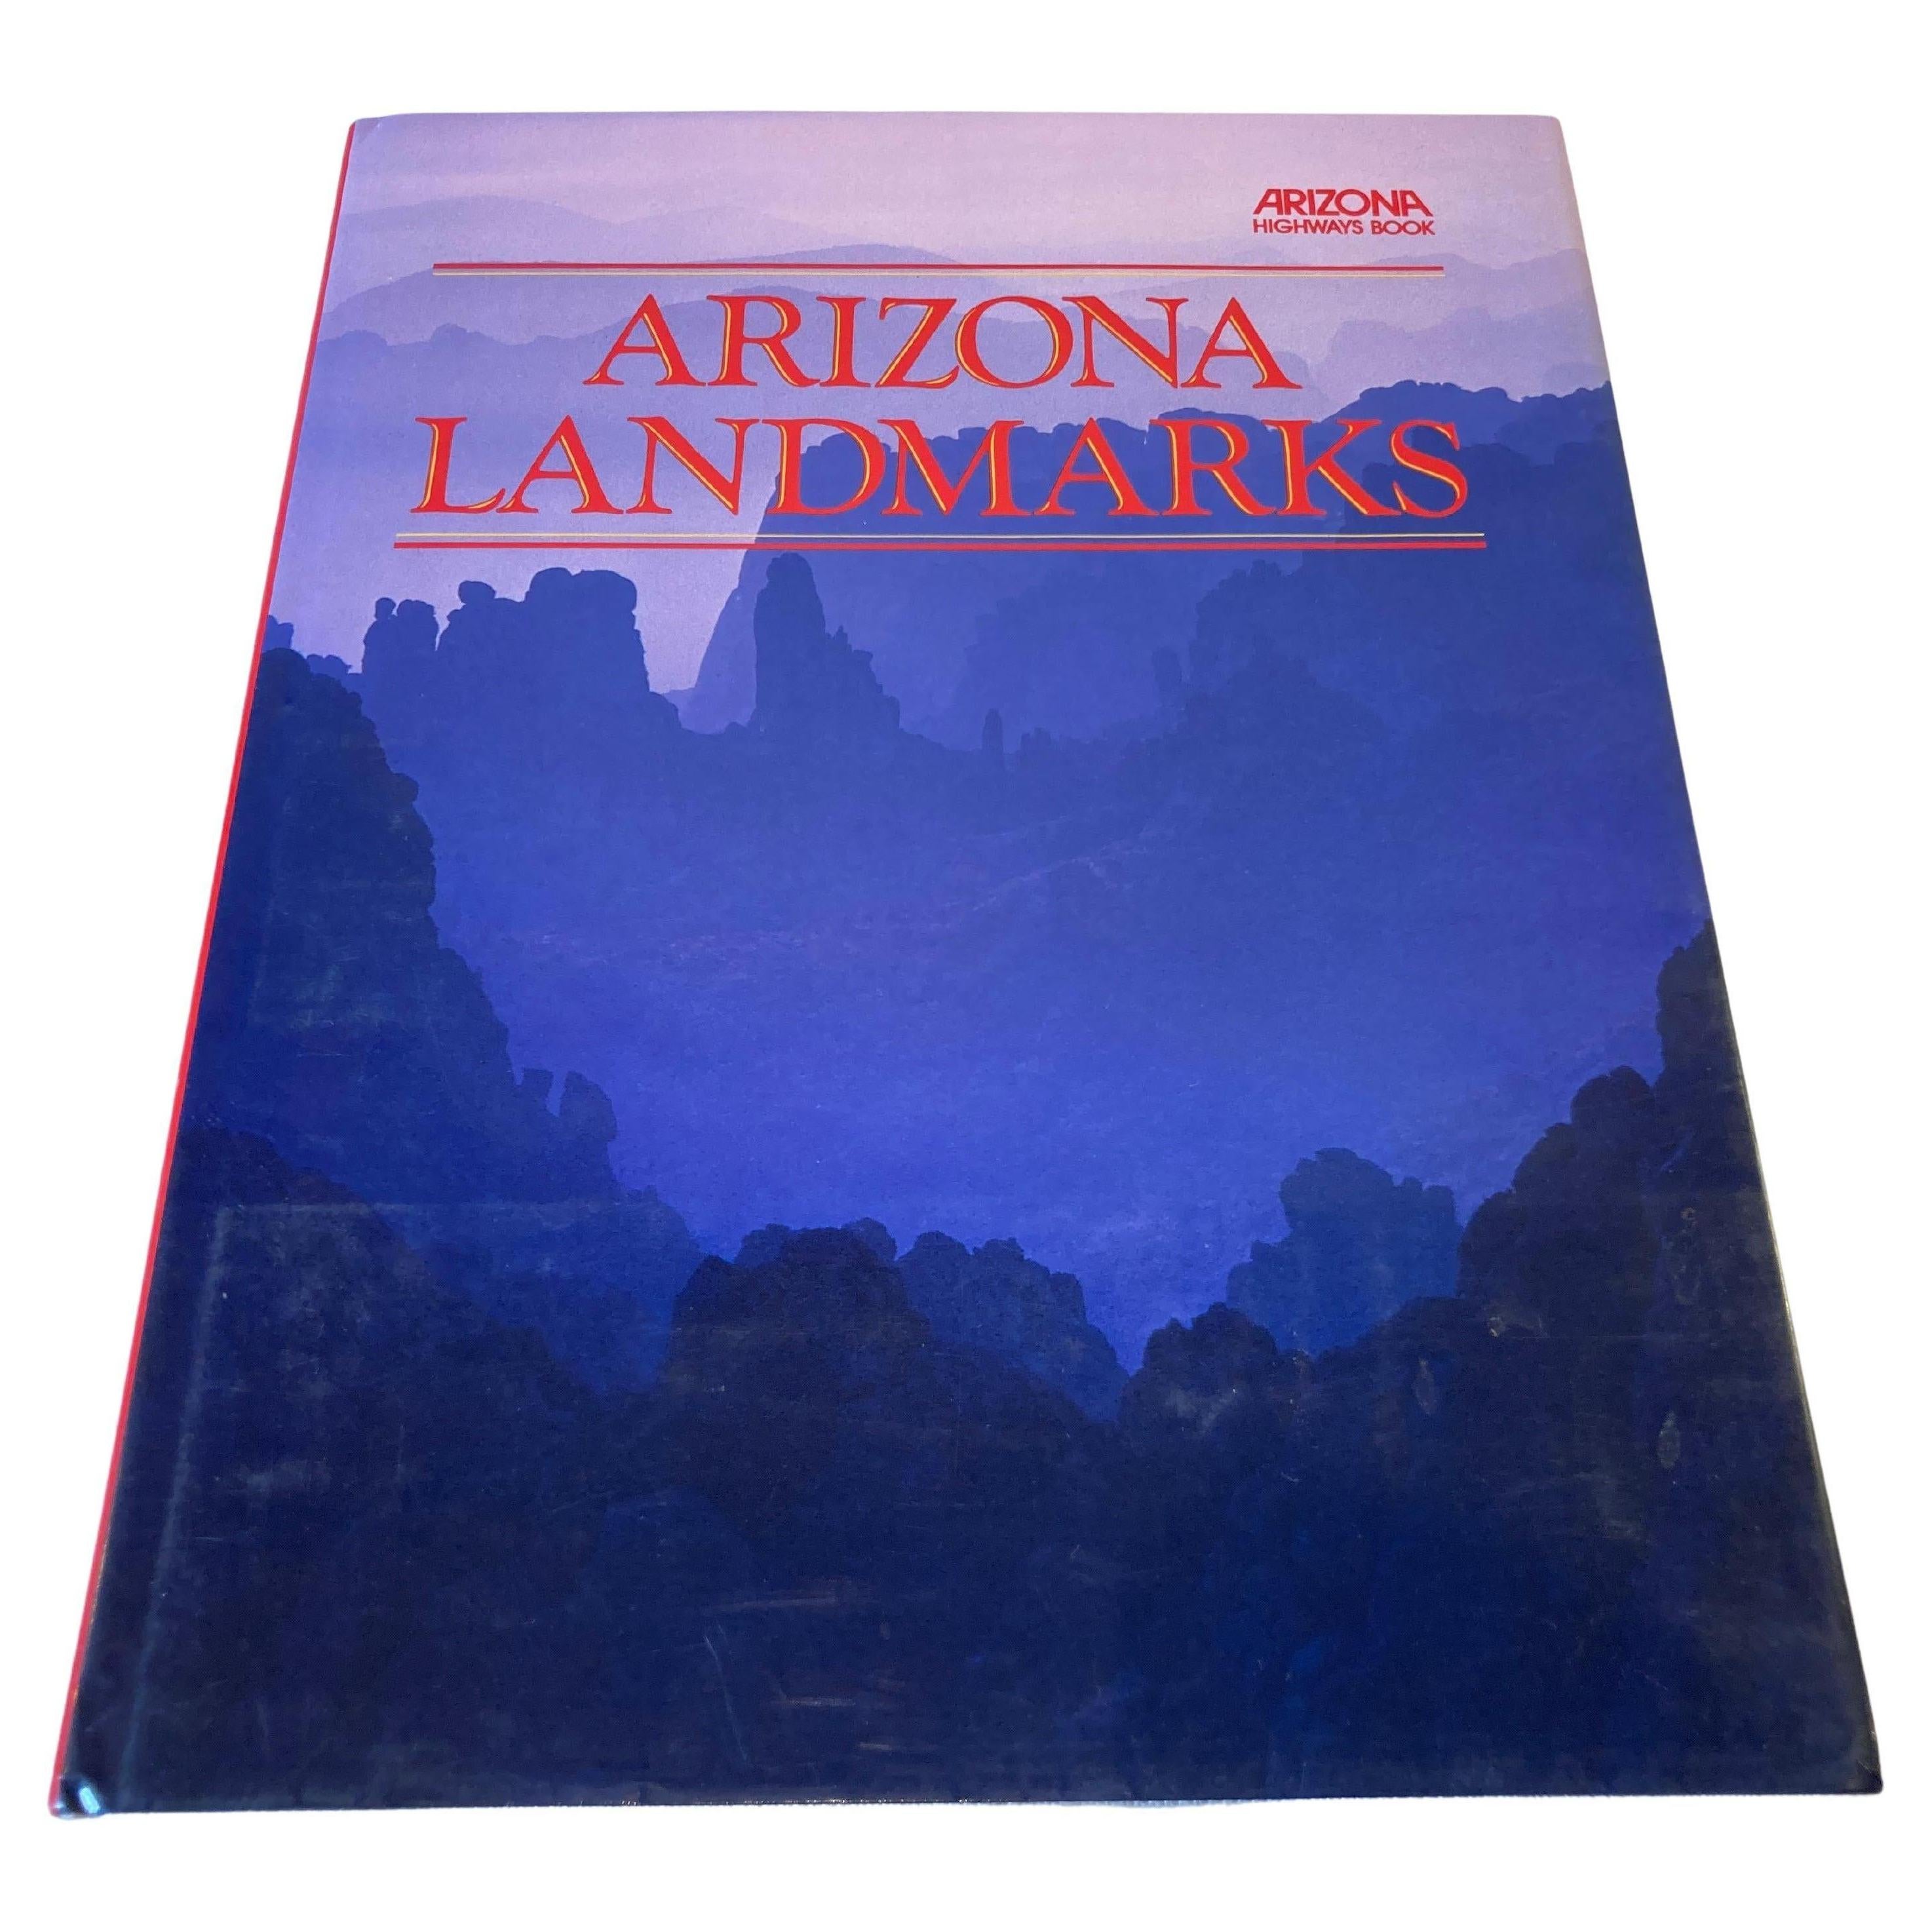 Whether you're new to Arizona or already an aficionado, this book highlights the Grand Canyon State's best-known places and best-kept secrets. 
Full-color photographs and art reproductions are accompanied by facts and folklore by Arizona author